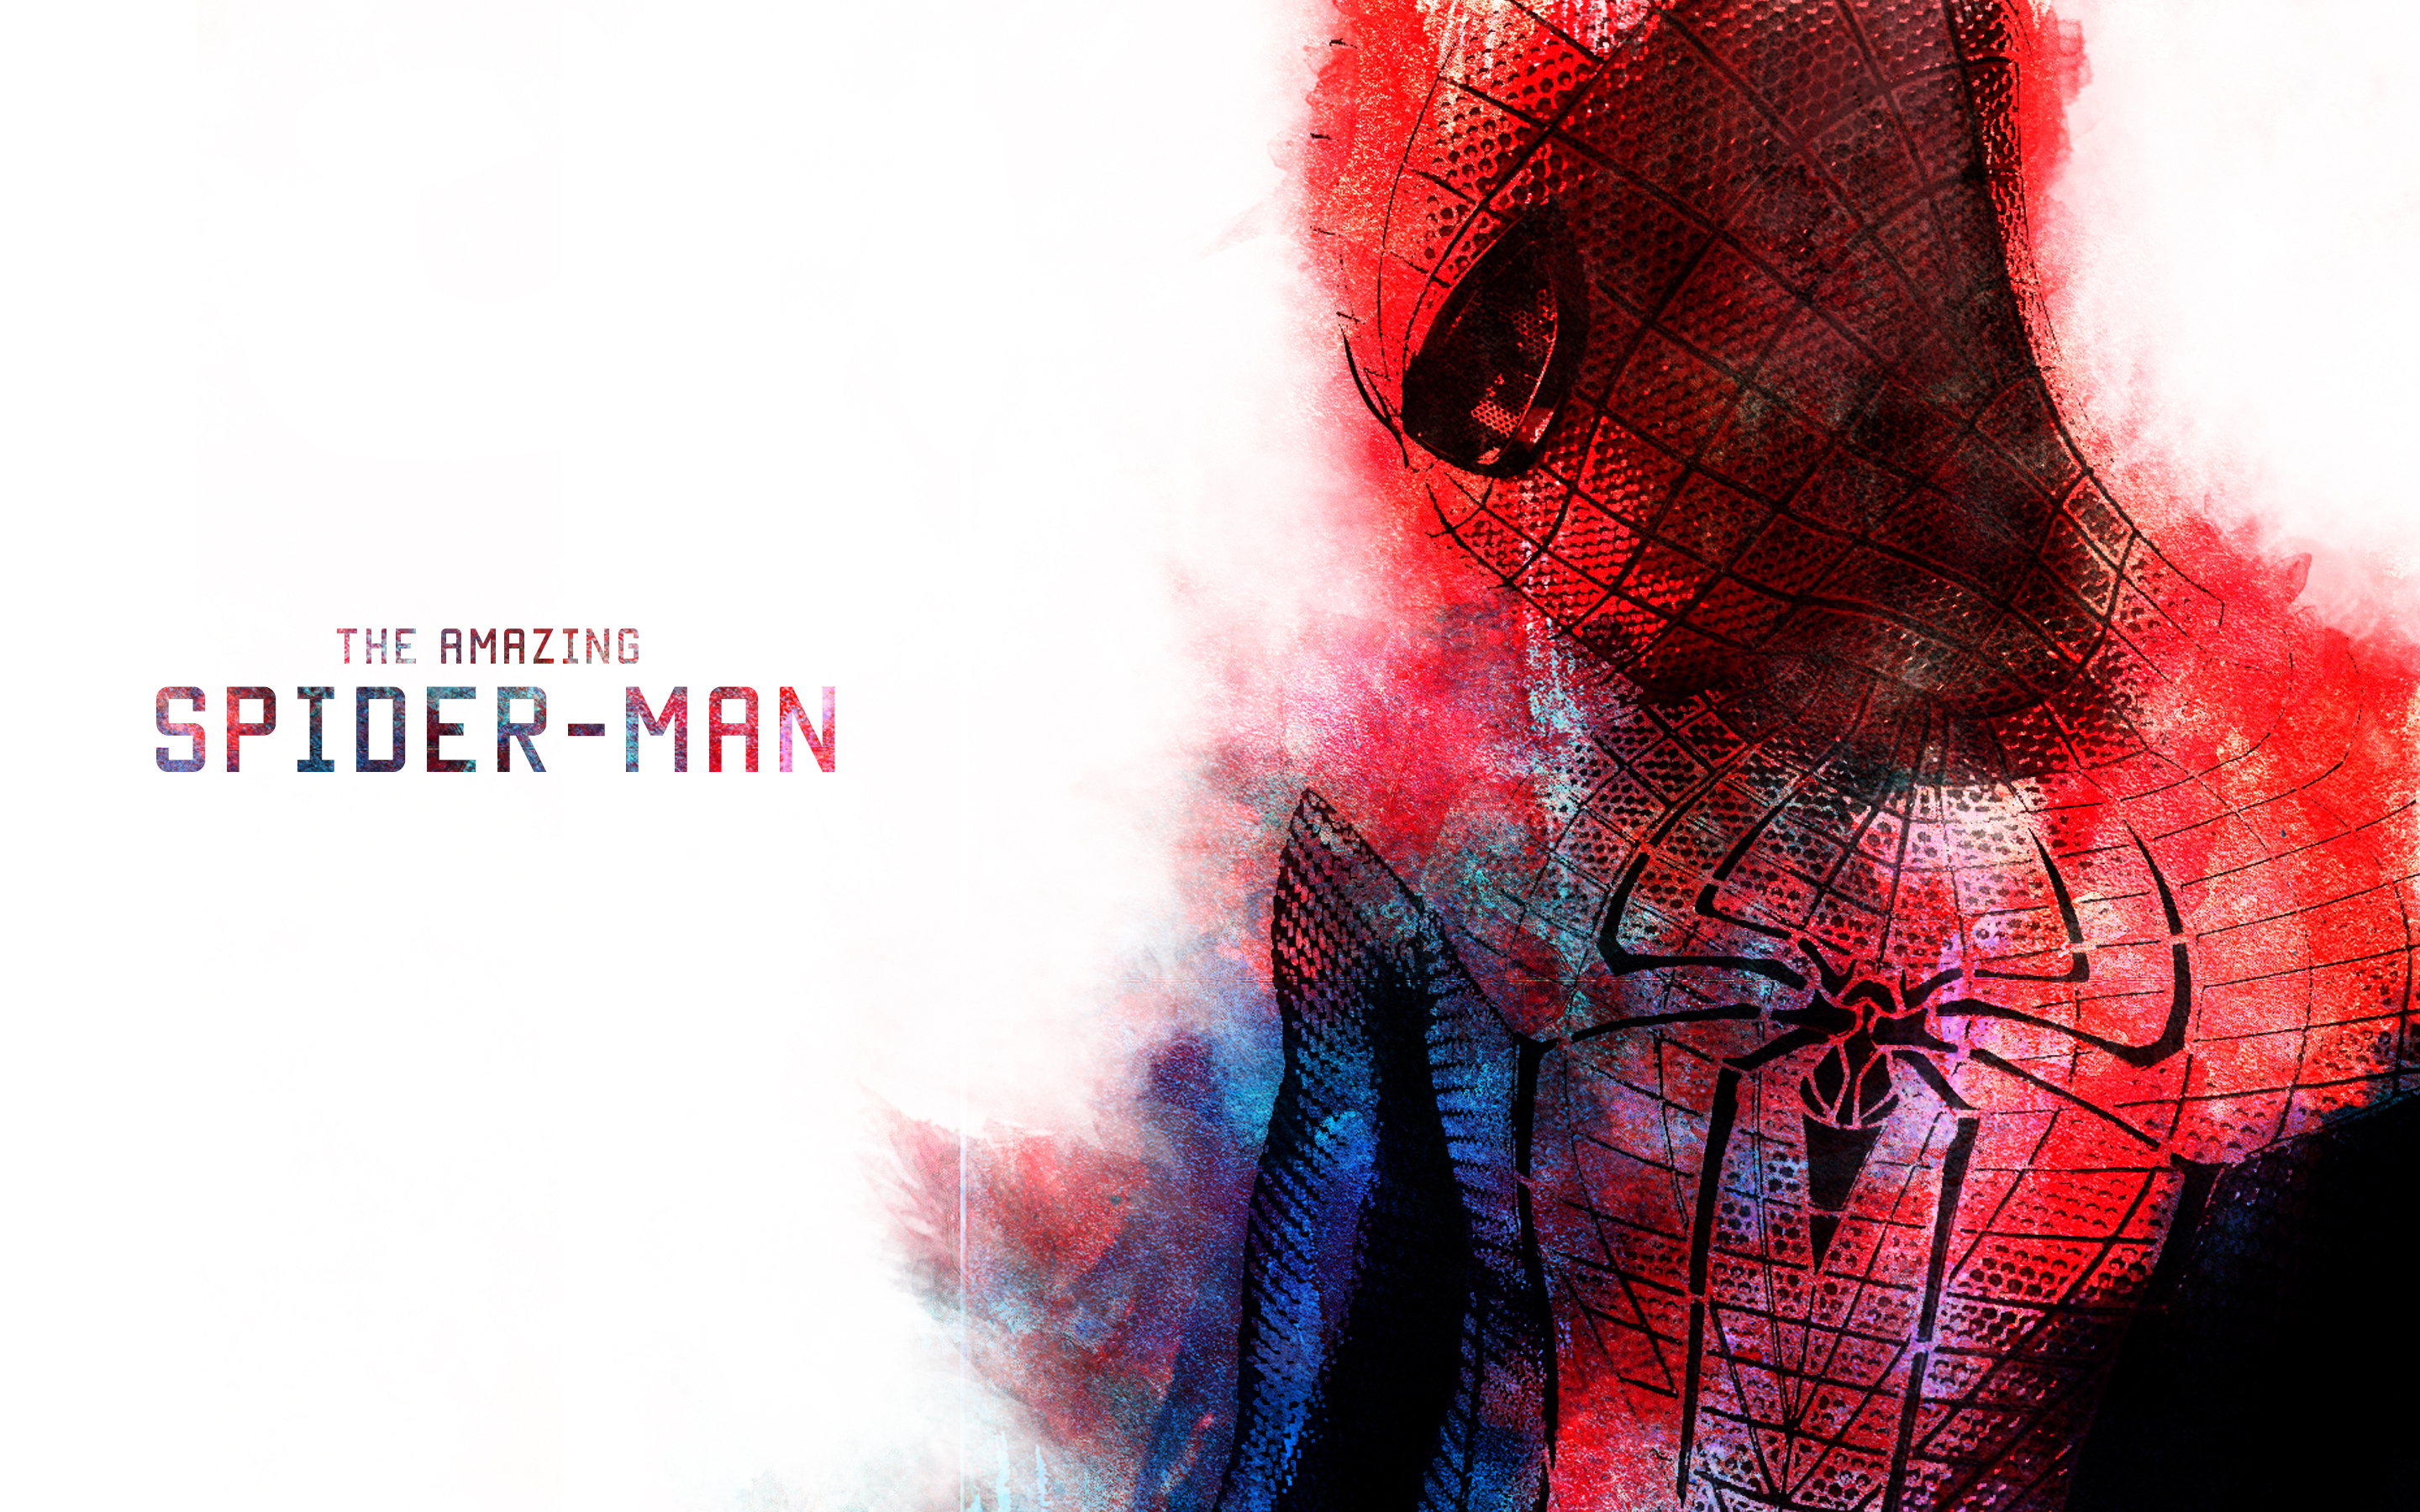  Amazing Spider Man HD Wallpaper in High Resolution at Movies Wallpaper 2880x1800